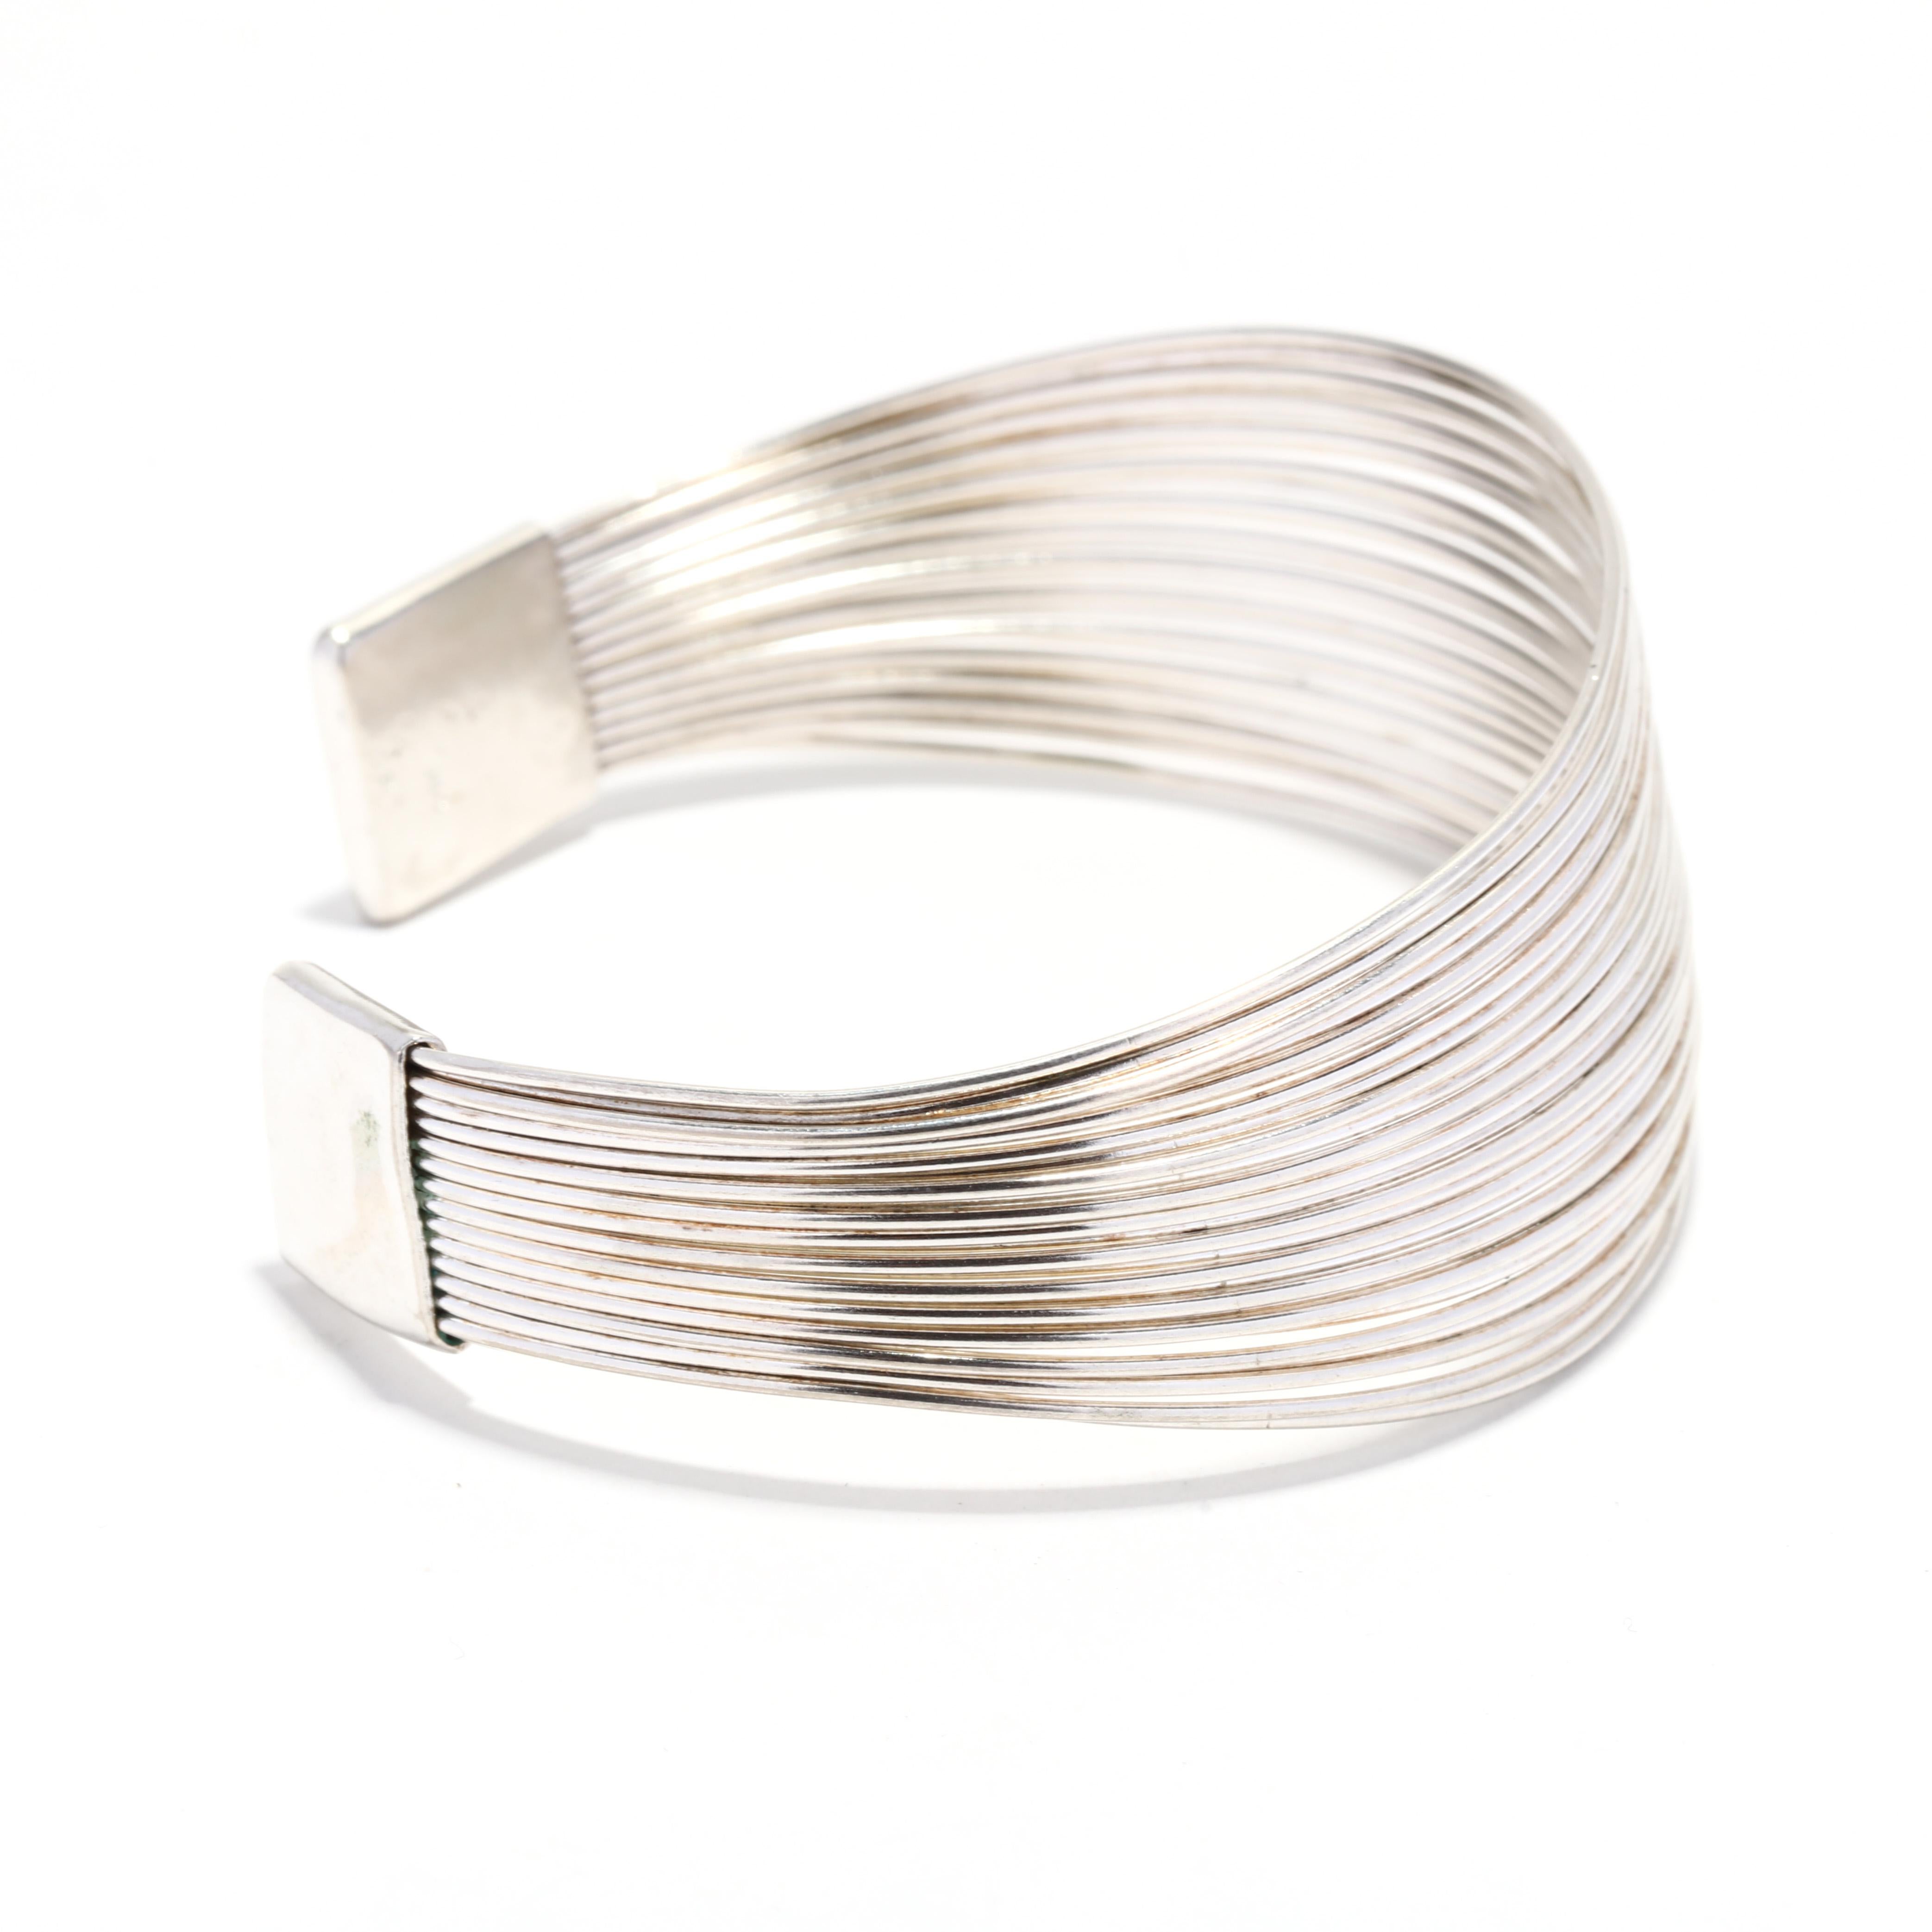 A vintage sterling silver multi-strand wire cuff bracelet.  This wide cuff bracelet features multiple strands of silver wire, joined at the terminals.  It is stamped 925.  

Length: 7 inch interior circumference with 1 1/8 inch opening

Width: 1